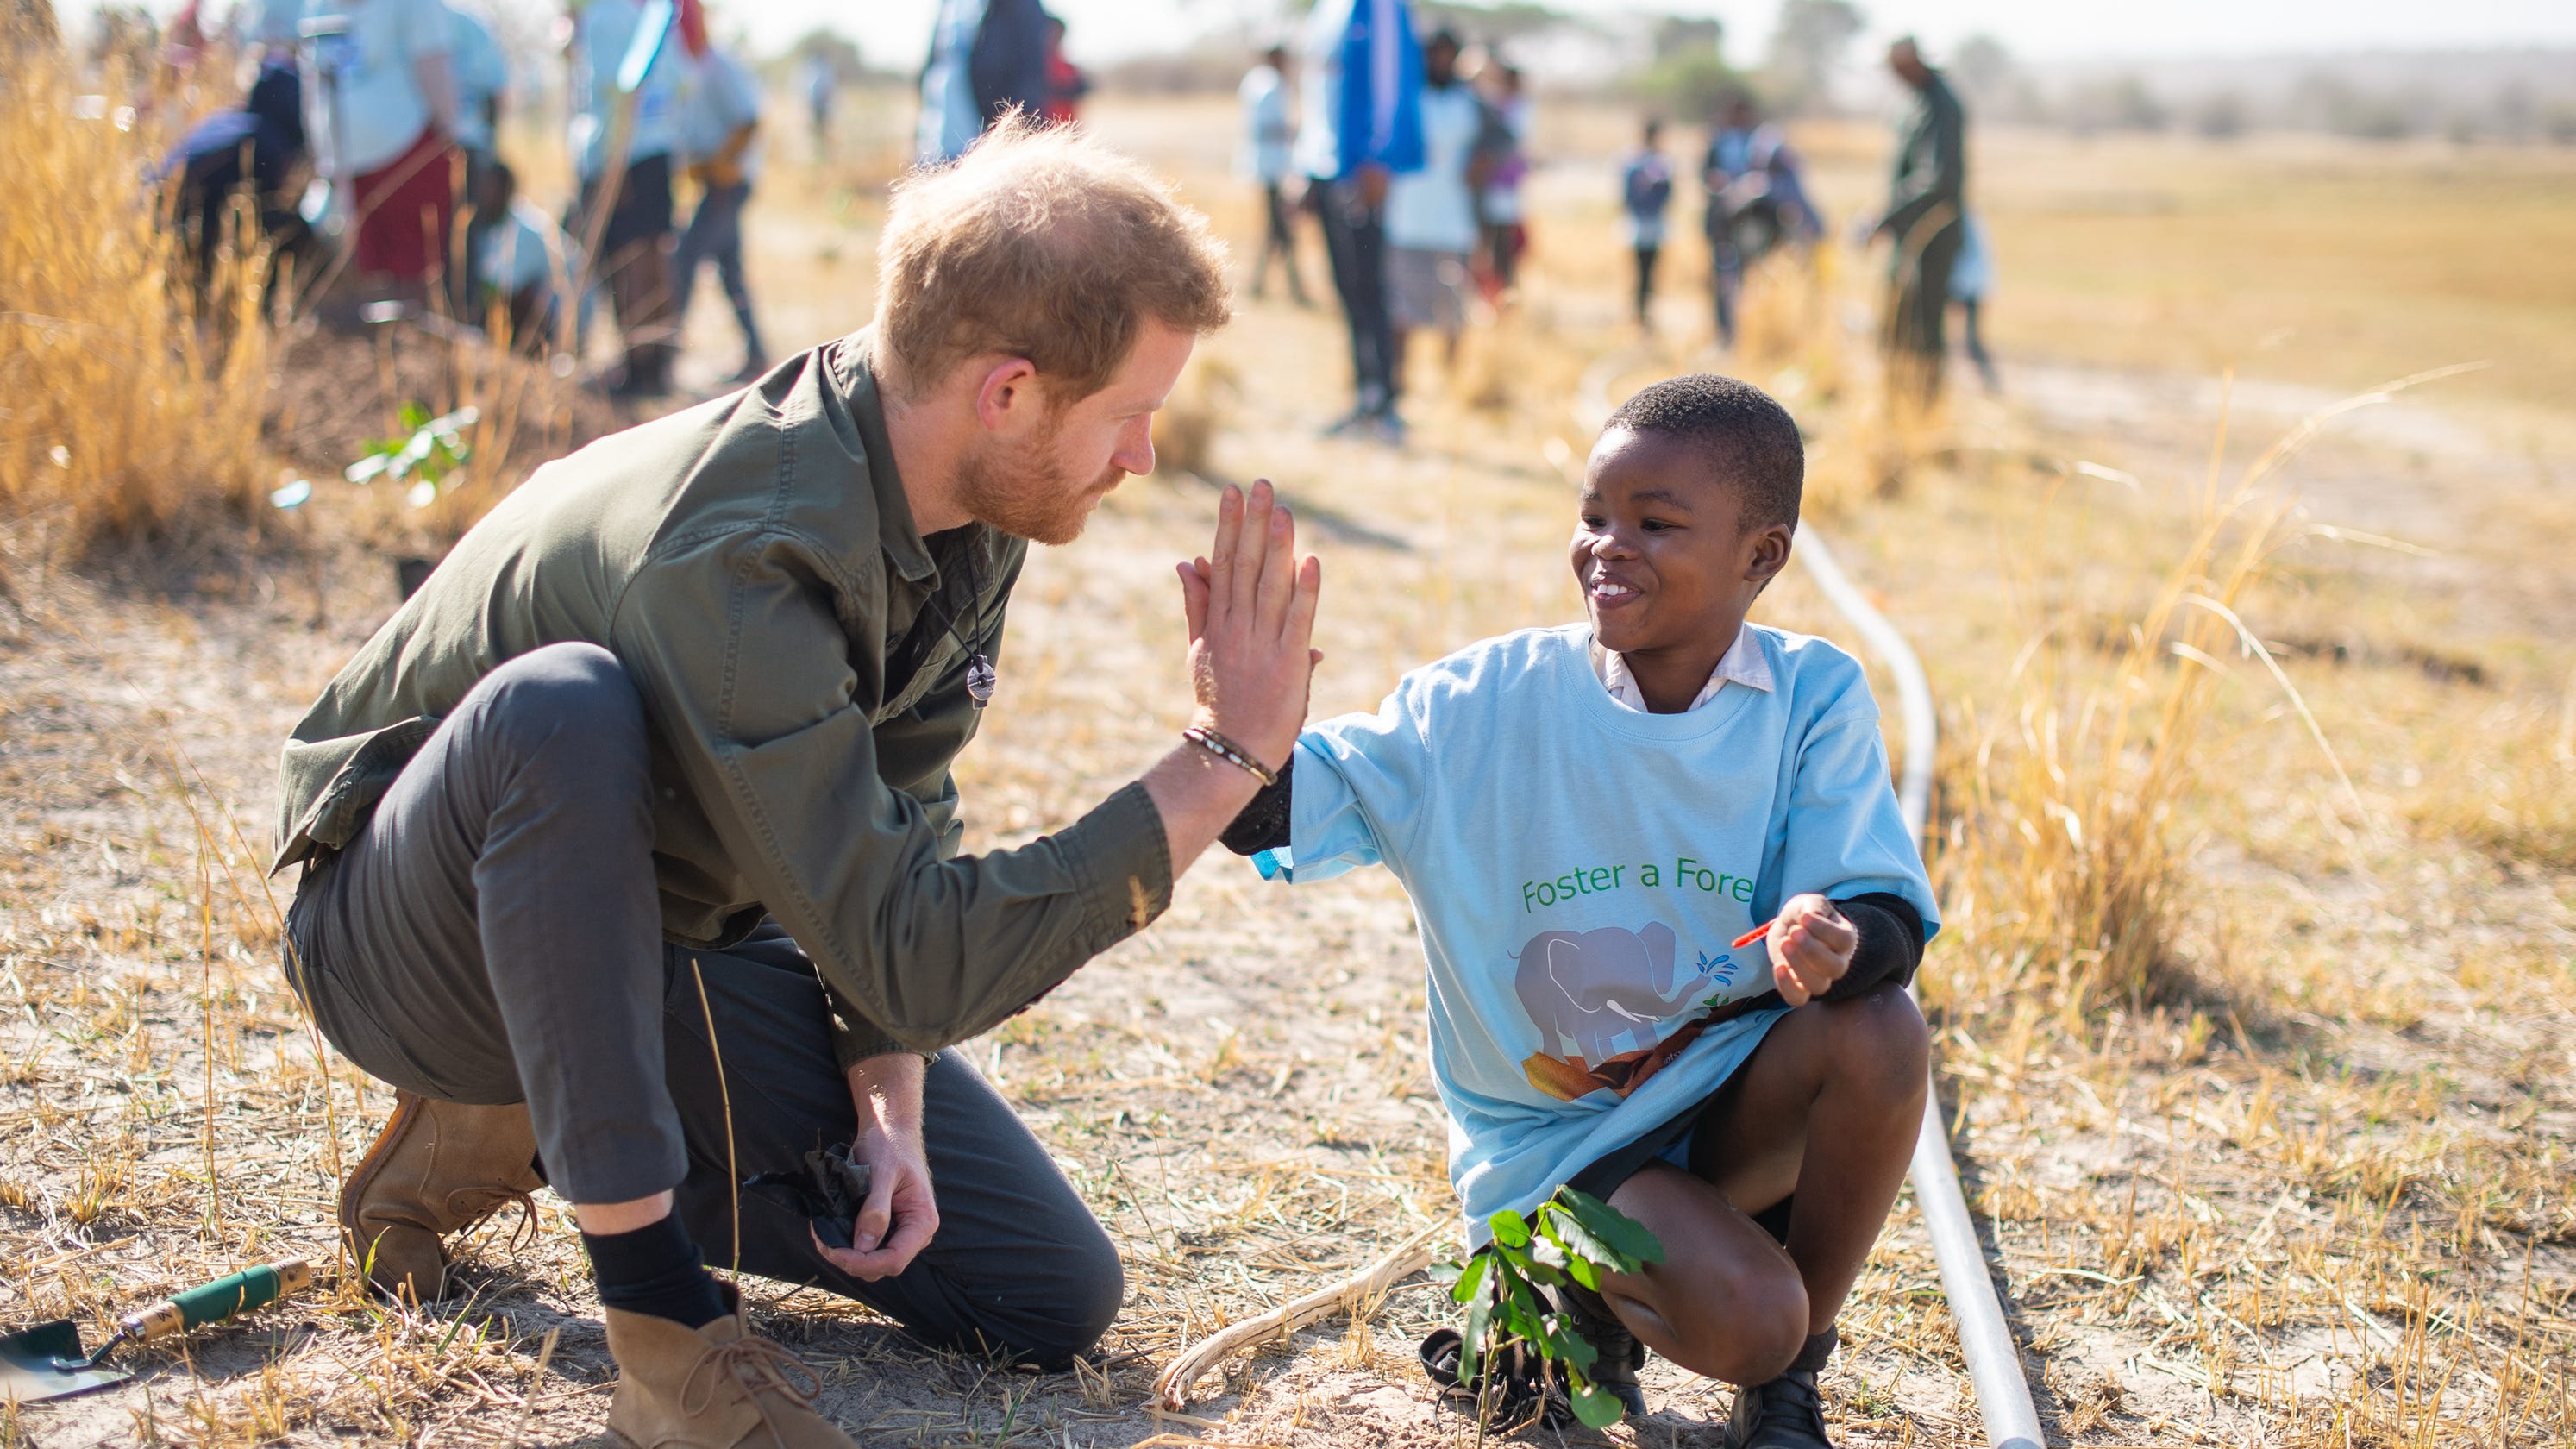 Prince Harry says during royal tour of Africa: 'No one can deny science' on climate change - USA TODAY